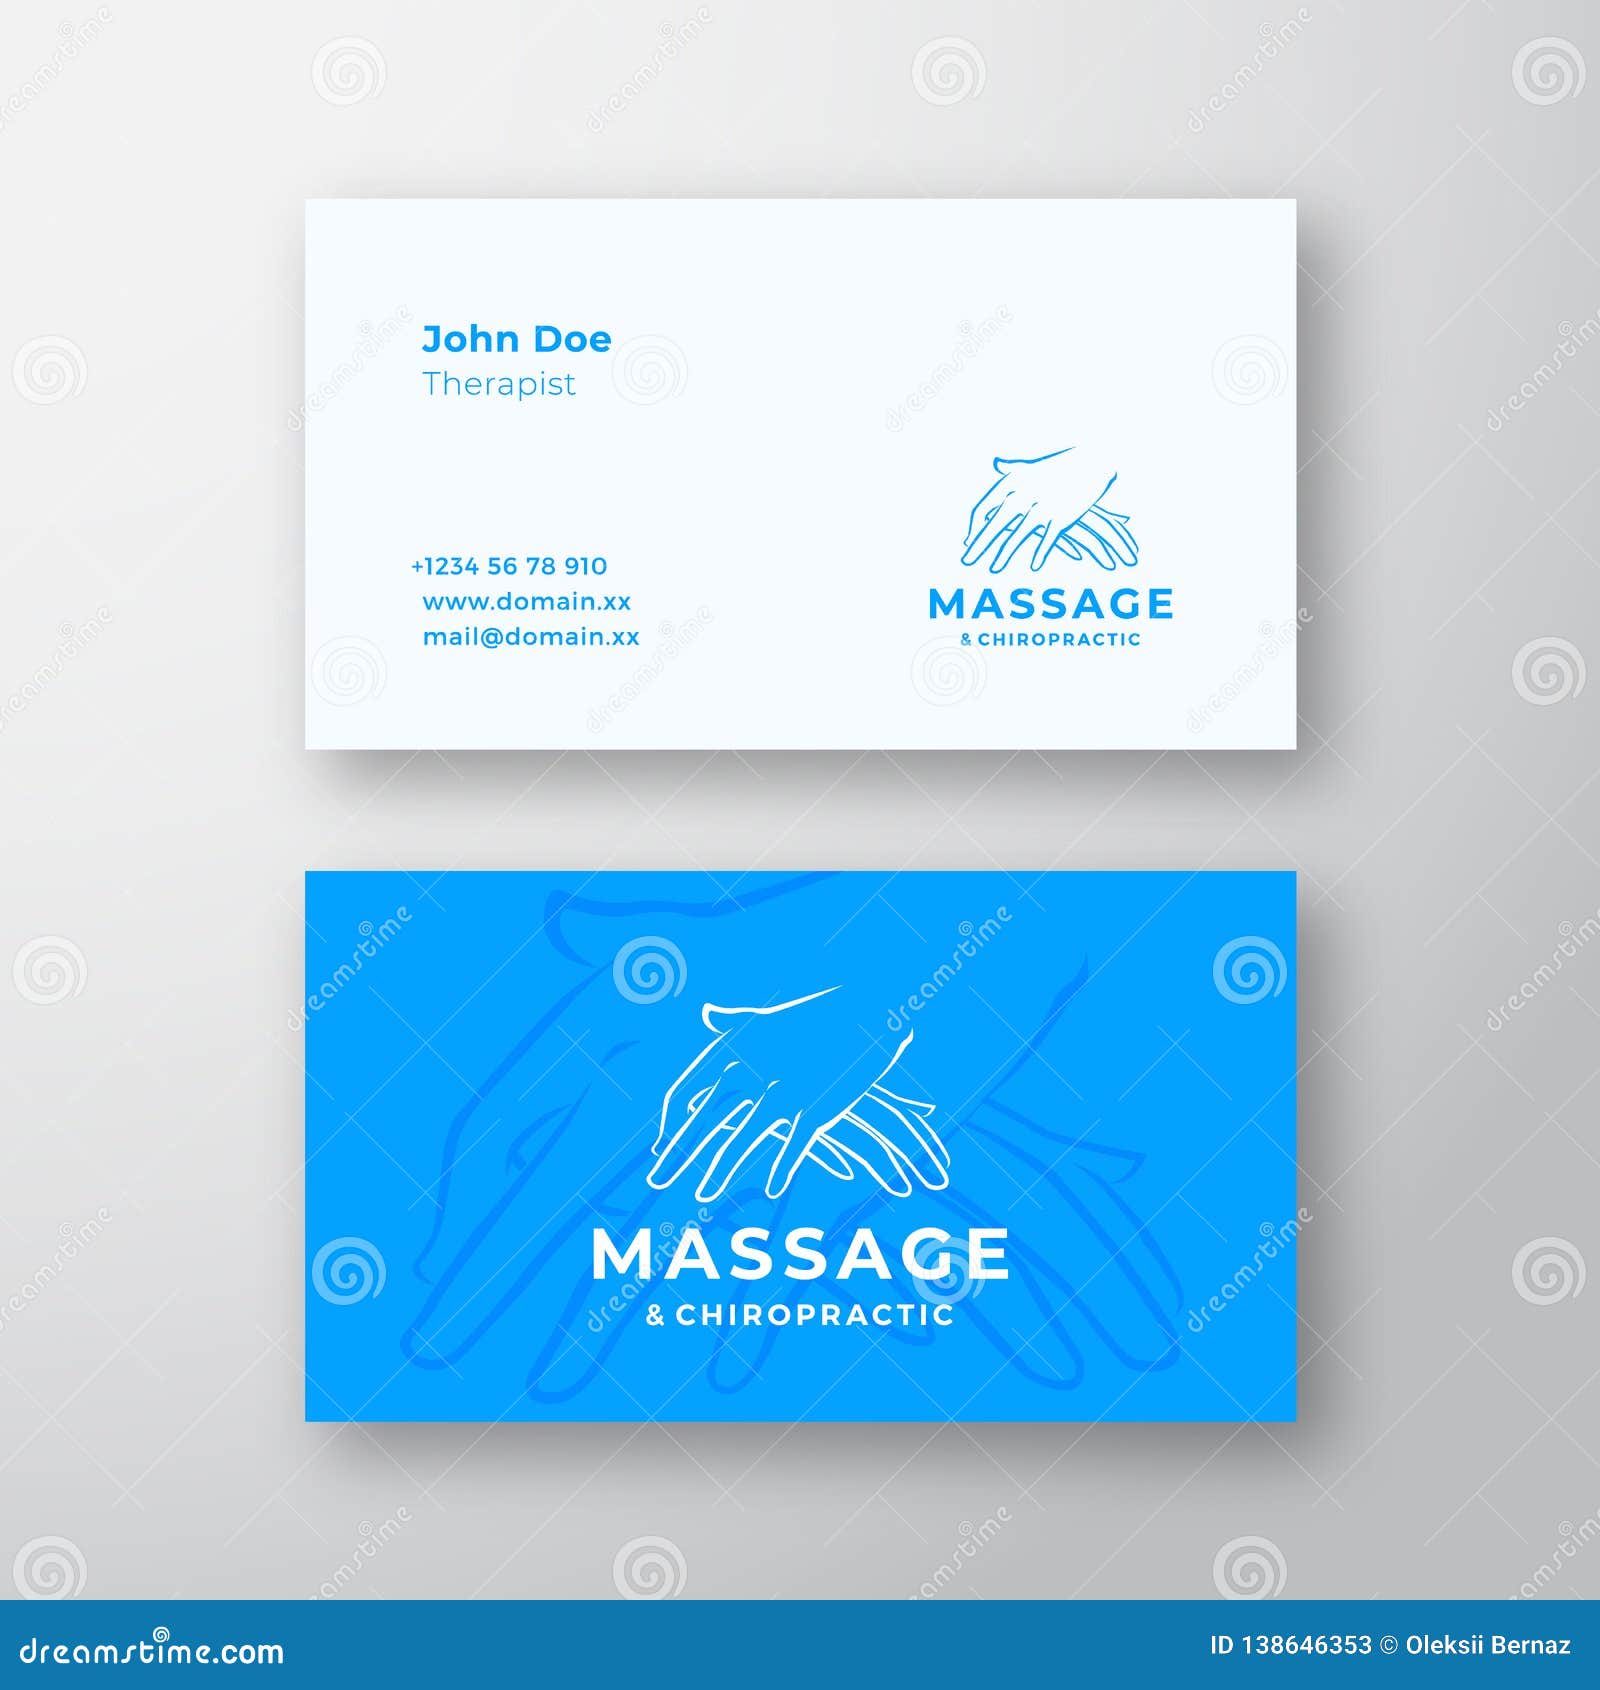 Massage and Chiropractic Abstract Vector Logo and Business Card For Massage Therapy Business Card Templates